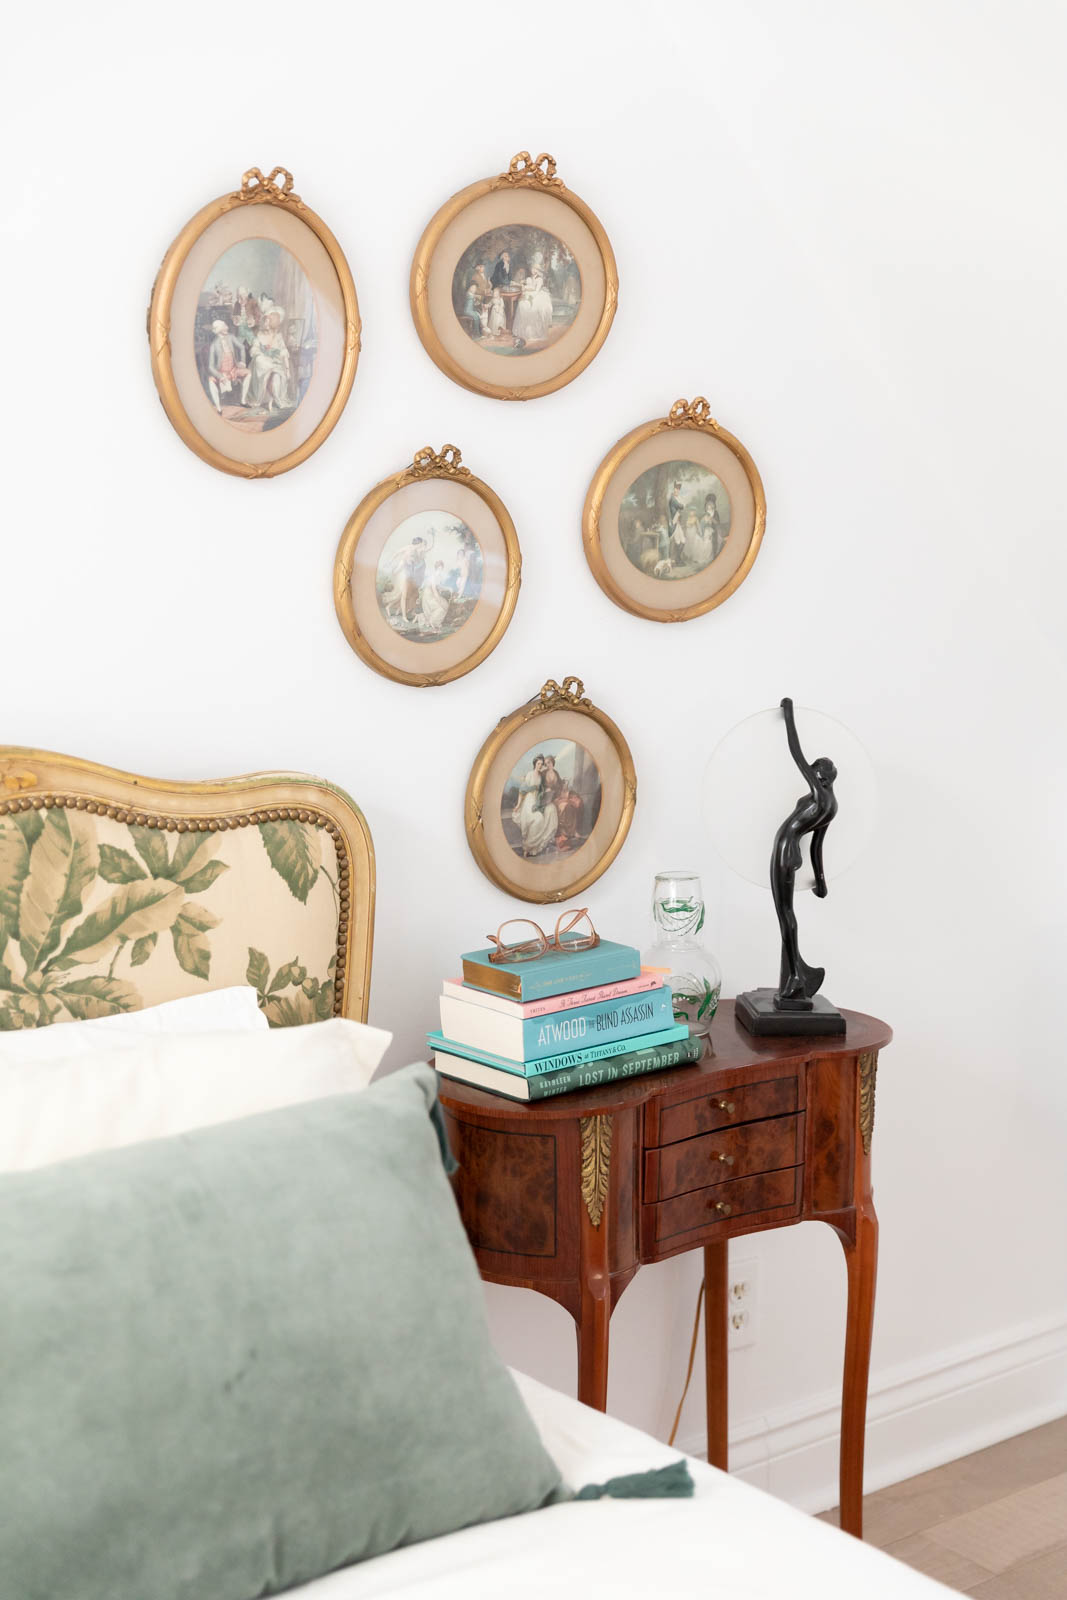 A bedside table with vintage paintings in gold frames and a stack of books